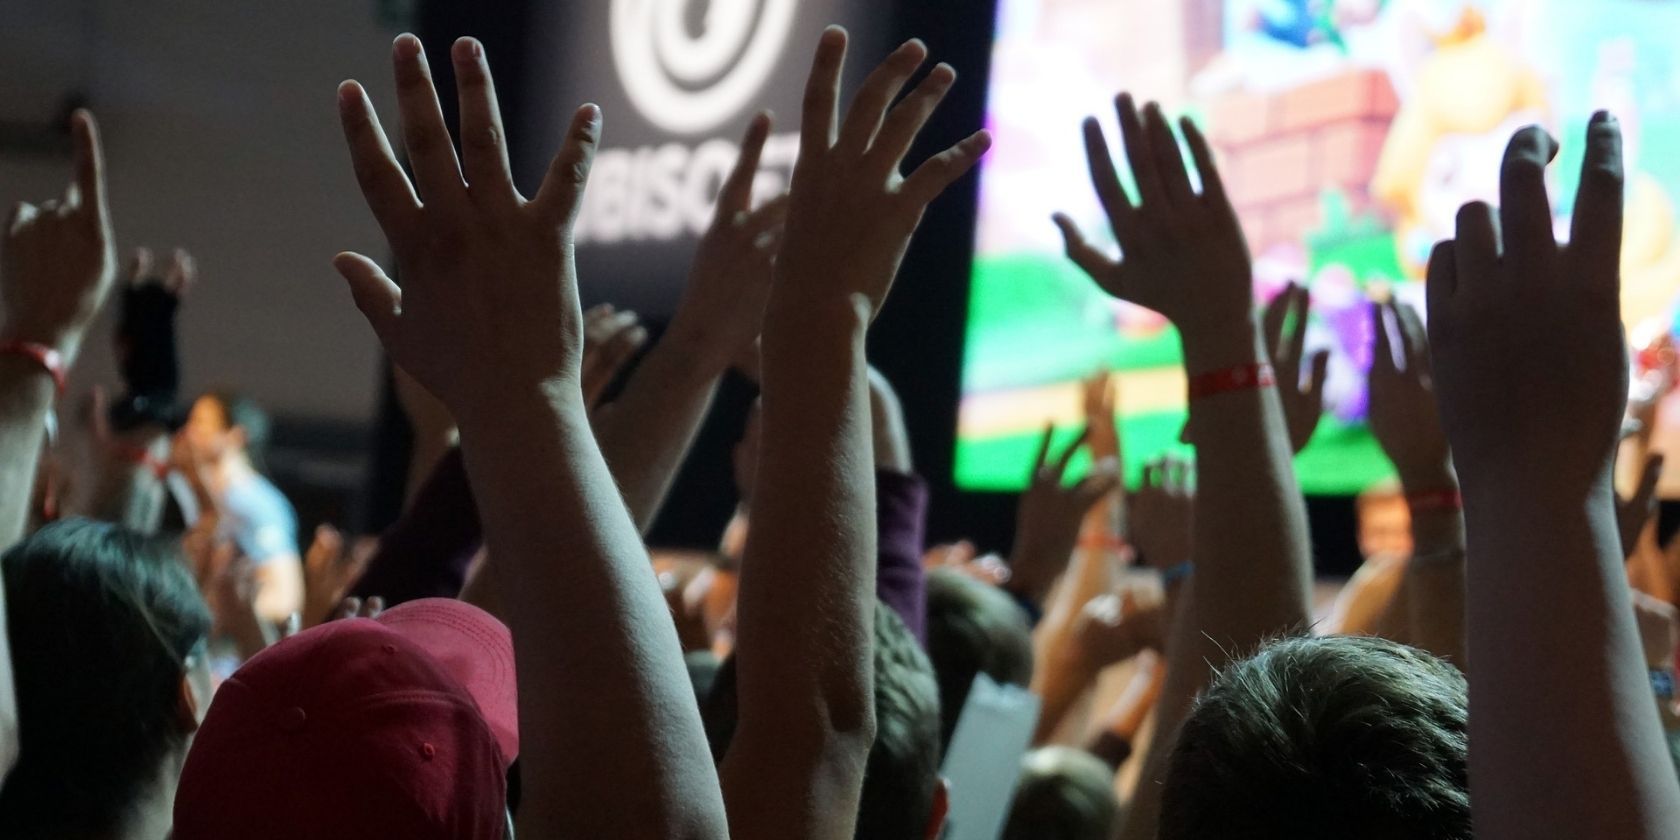 A crowd of people cheering at a Ubisoft event.